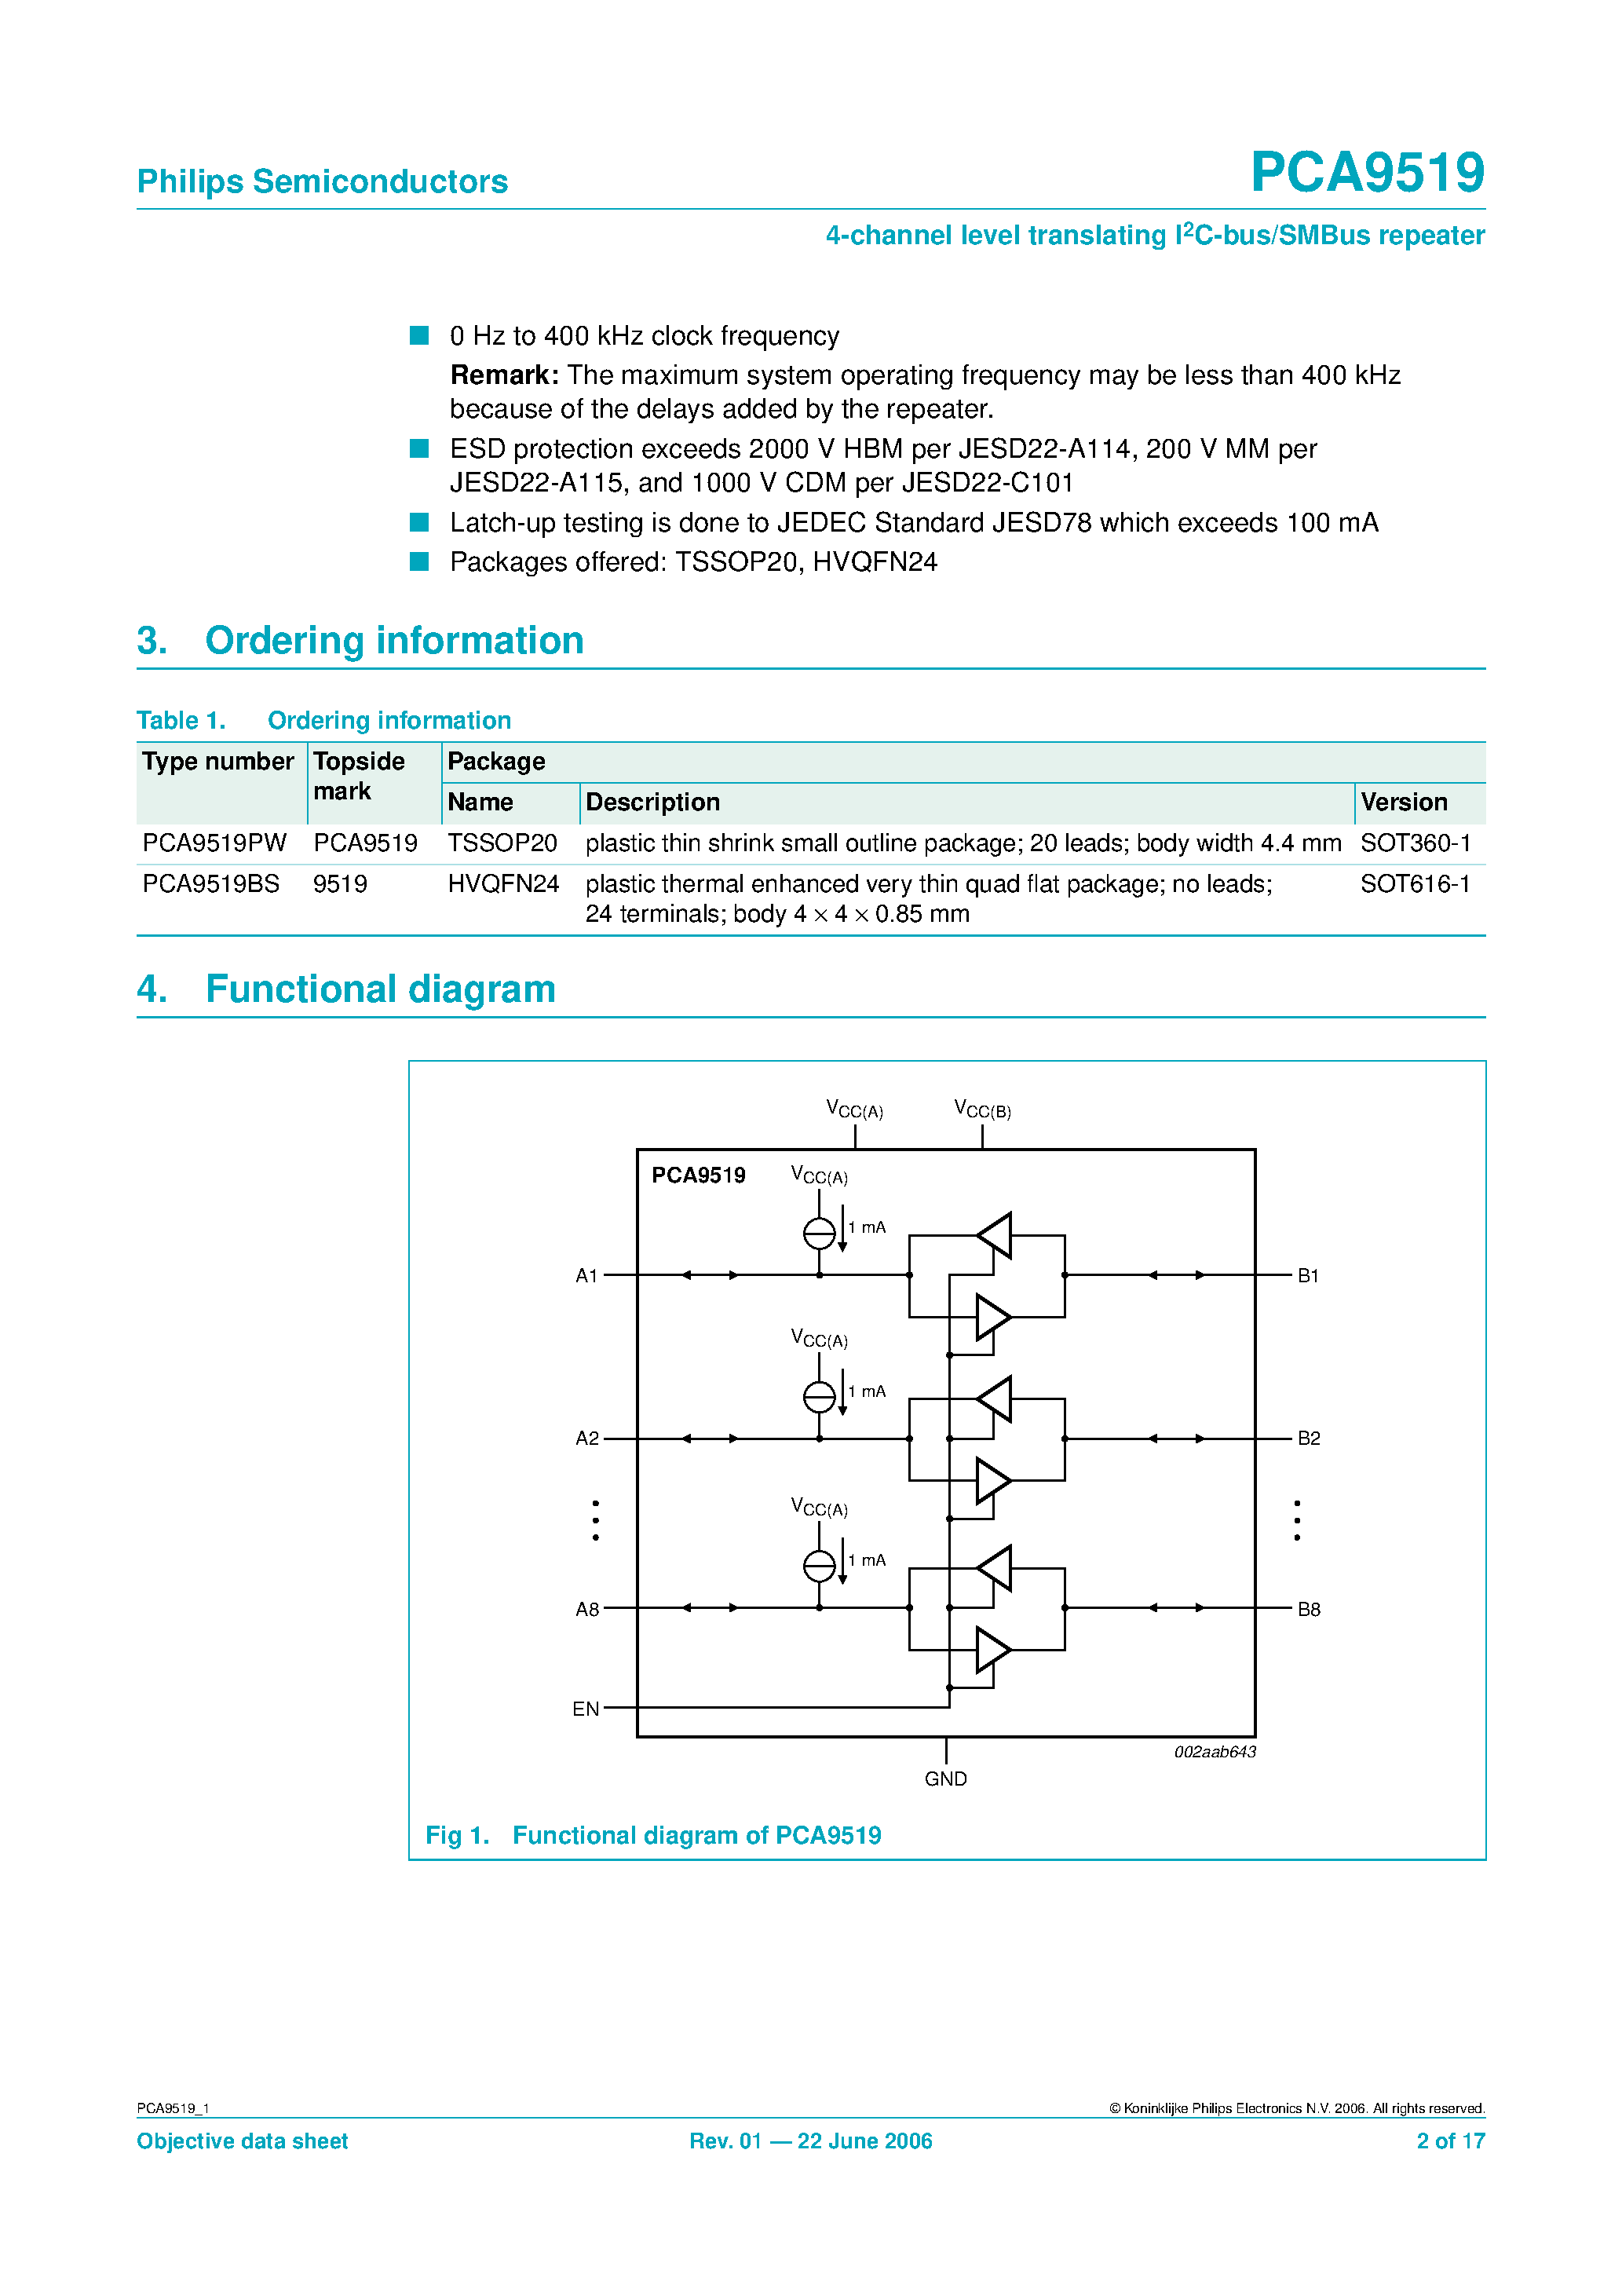 Datasheet PCA9519 - 4-channel level translating I2C-bus/SMBus repeater page 2